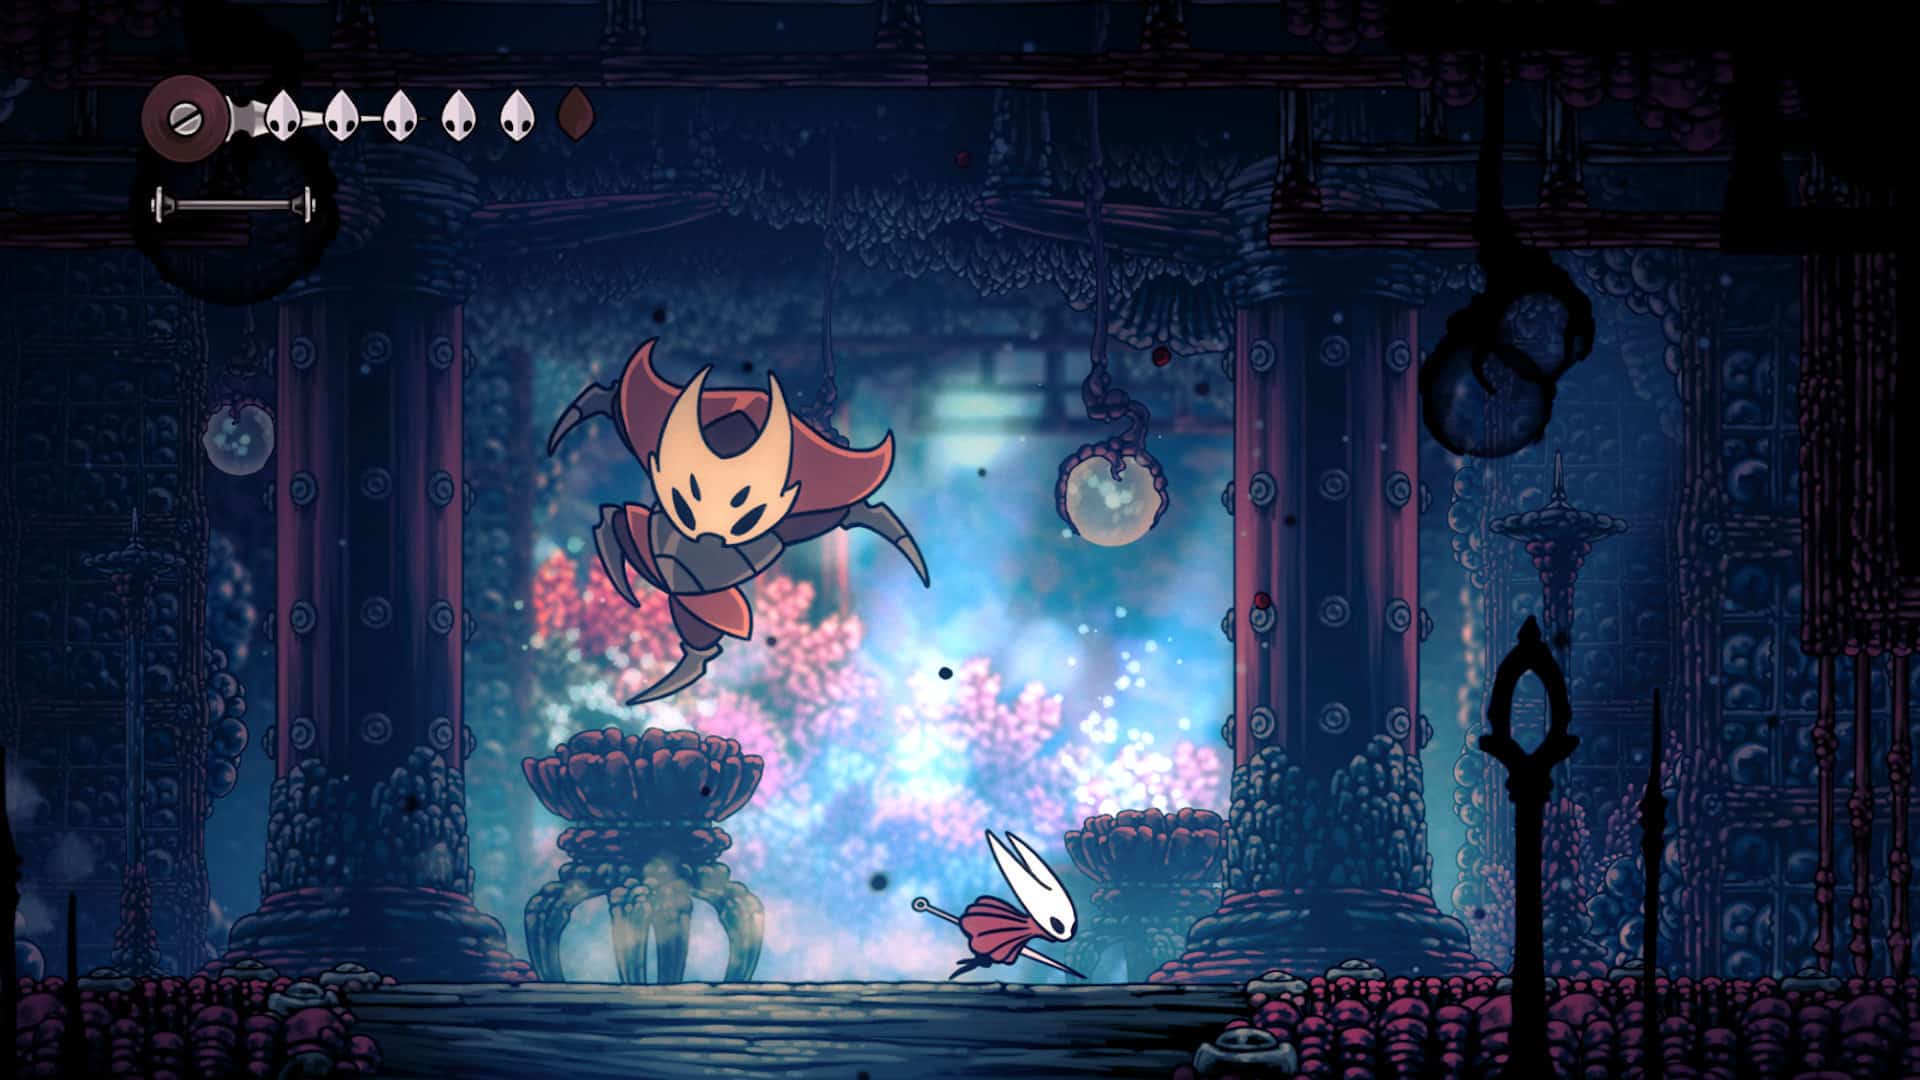 New Hollow Knight: Silksong Gameplay Shown At Xbox & Bethesda Games Showcase